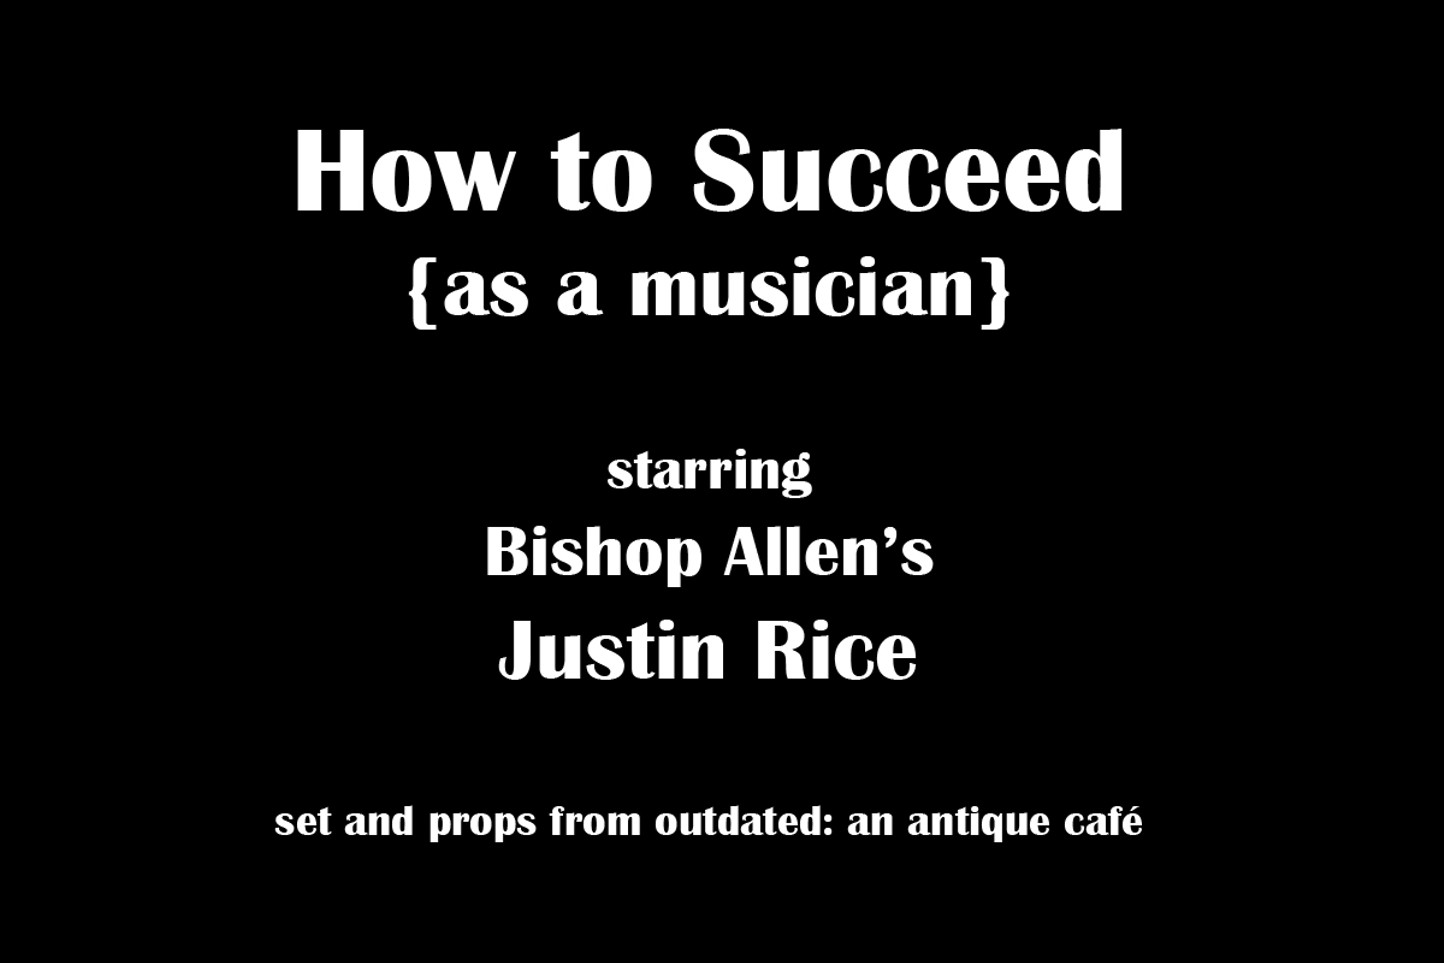 How to Succeed as a Musician